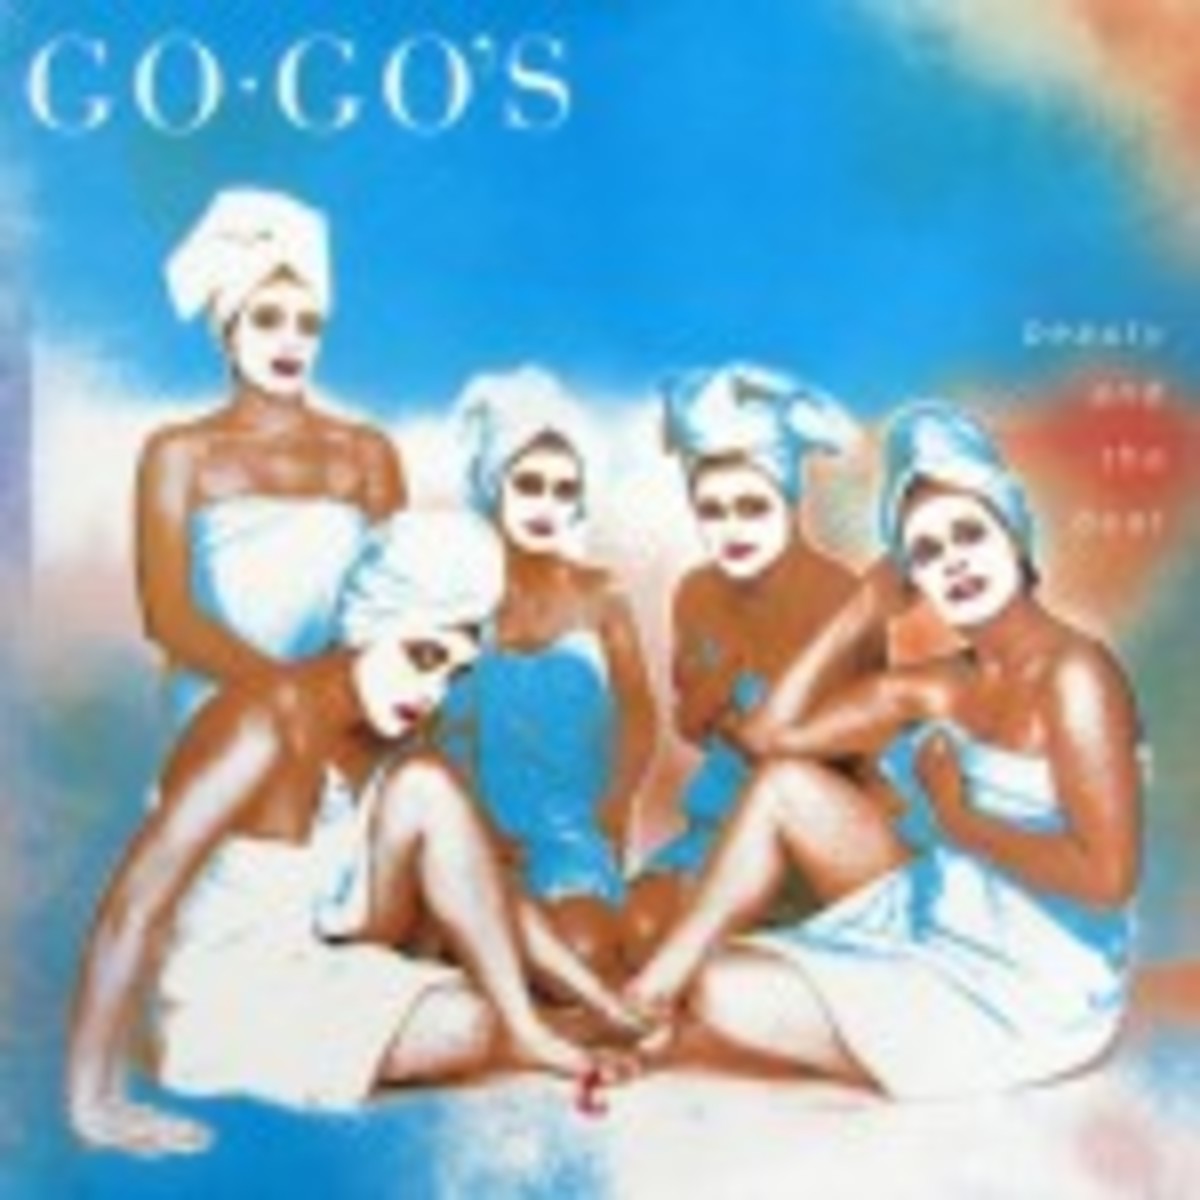 Go-Go's_Beauty and the Beat